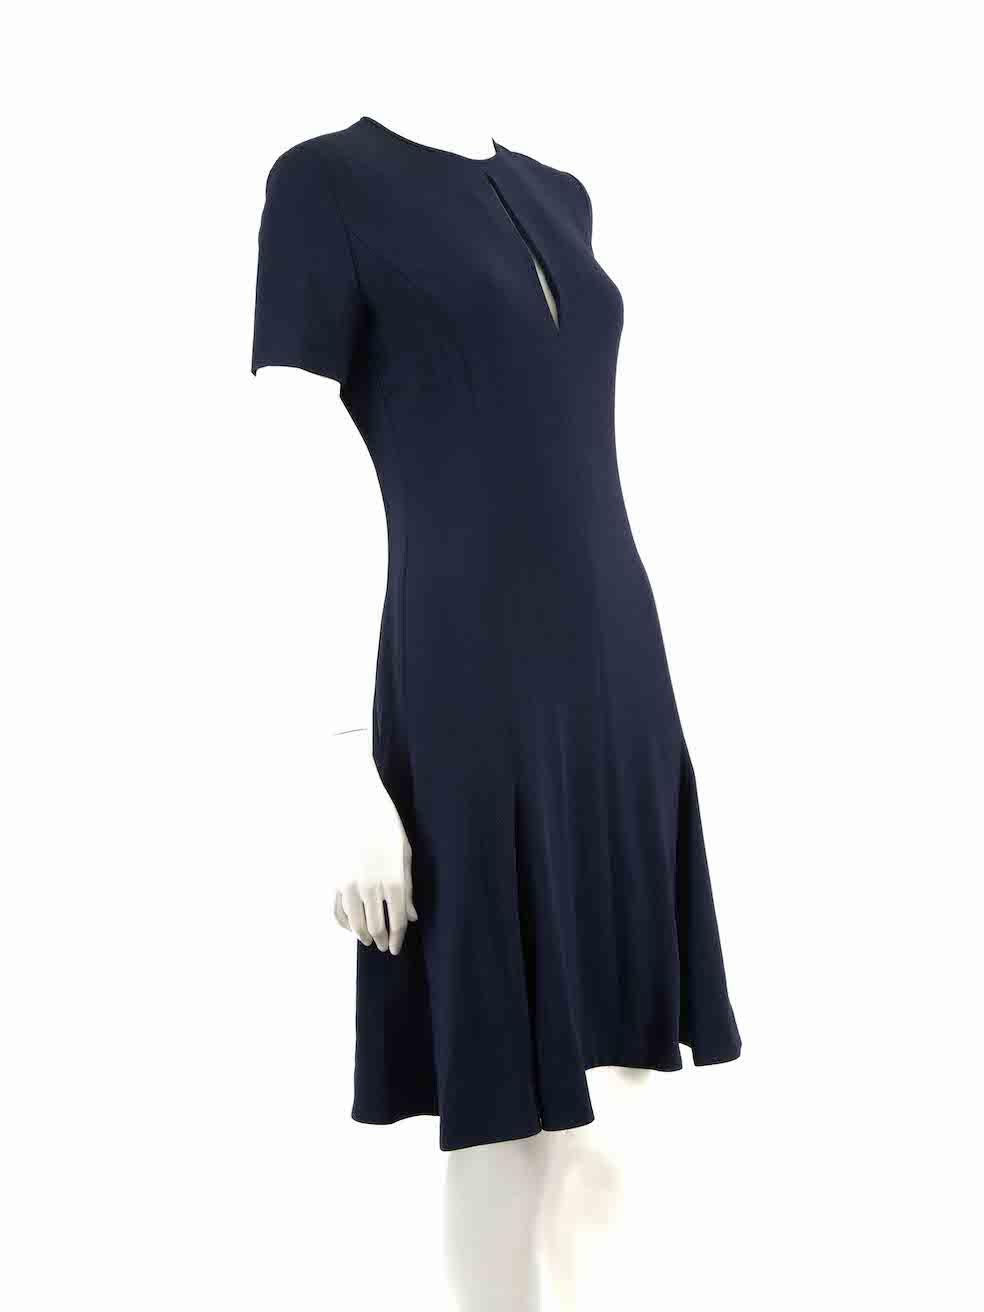 CONDITION is Very good. Minimal wear to dress is evident. Minimal wear to side with minor stain on this used Stella McCartney designer resale item.
 
 
 
 Details
 
 
 Blue
 
 Viscose
 
 Dress
 
 Short sleeves
 
 Knee length
 
 Front keyhole
 
